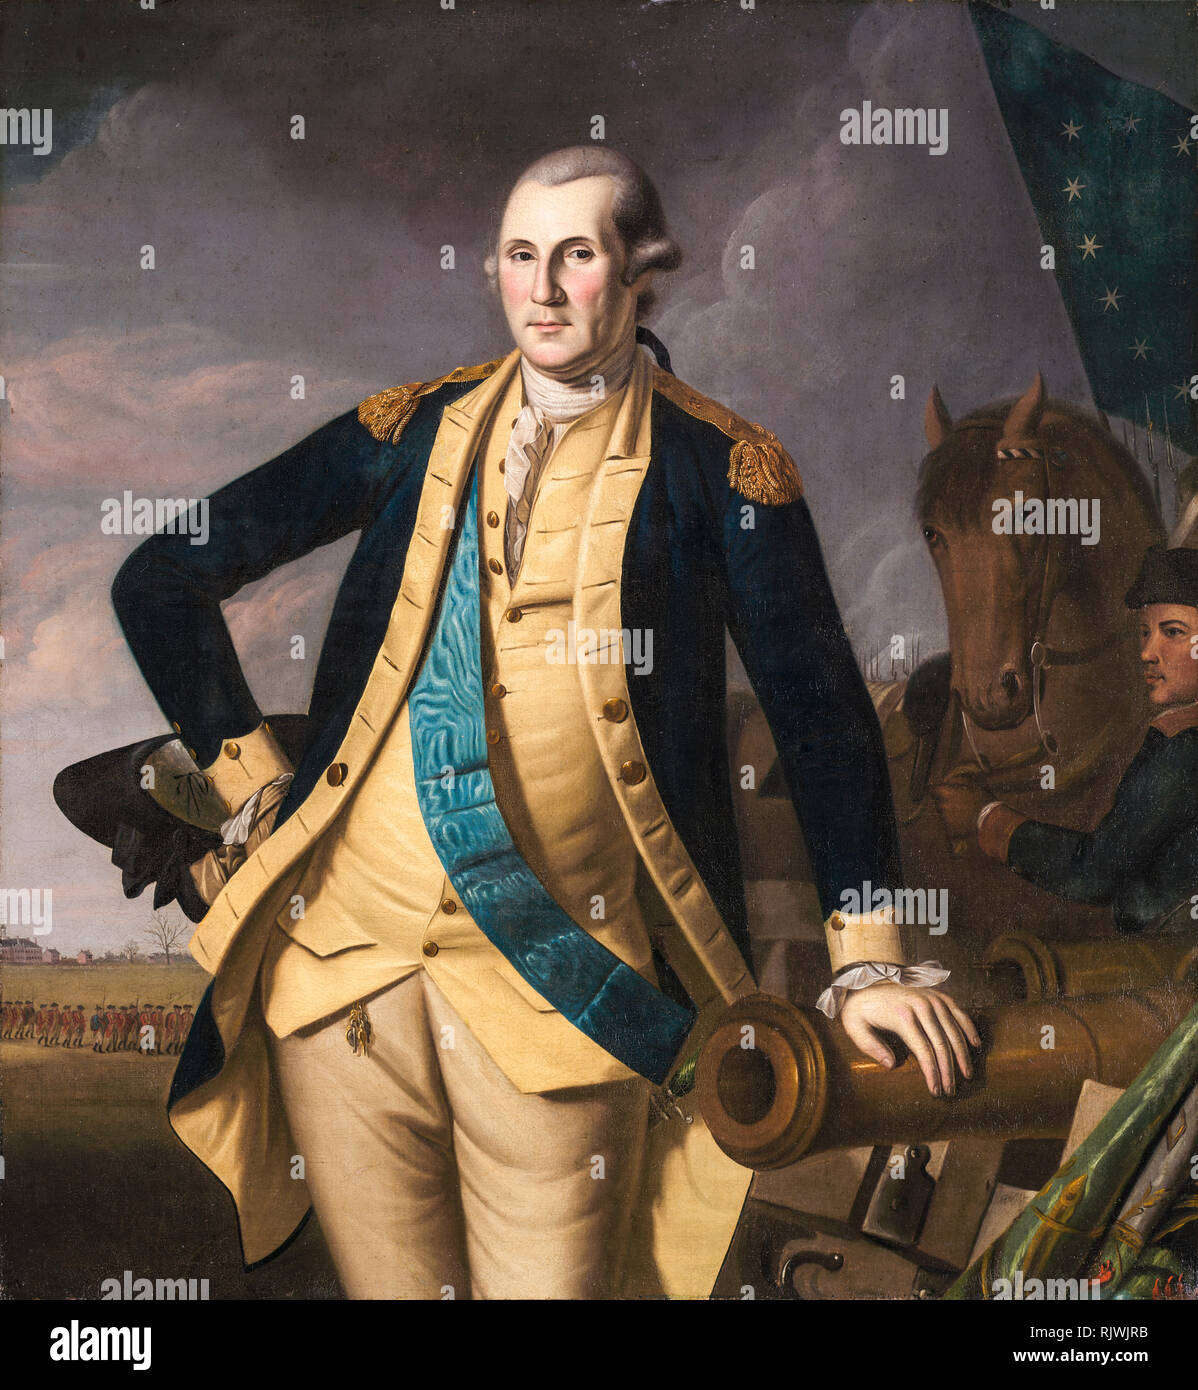 George Washington after the Battle of Princeton, Charles Willson Peale, 1779 - portrait Stock Photo